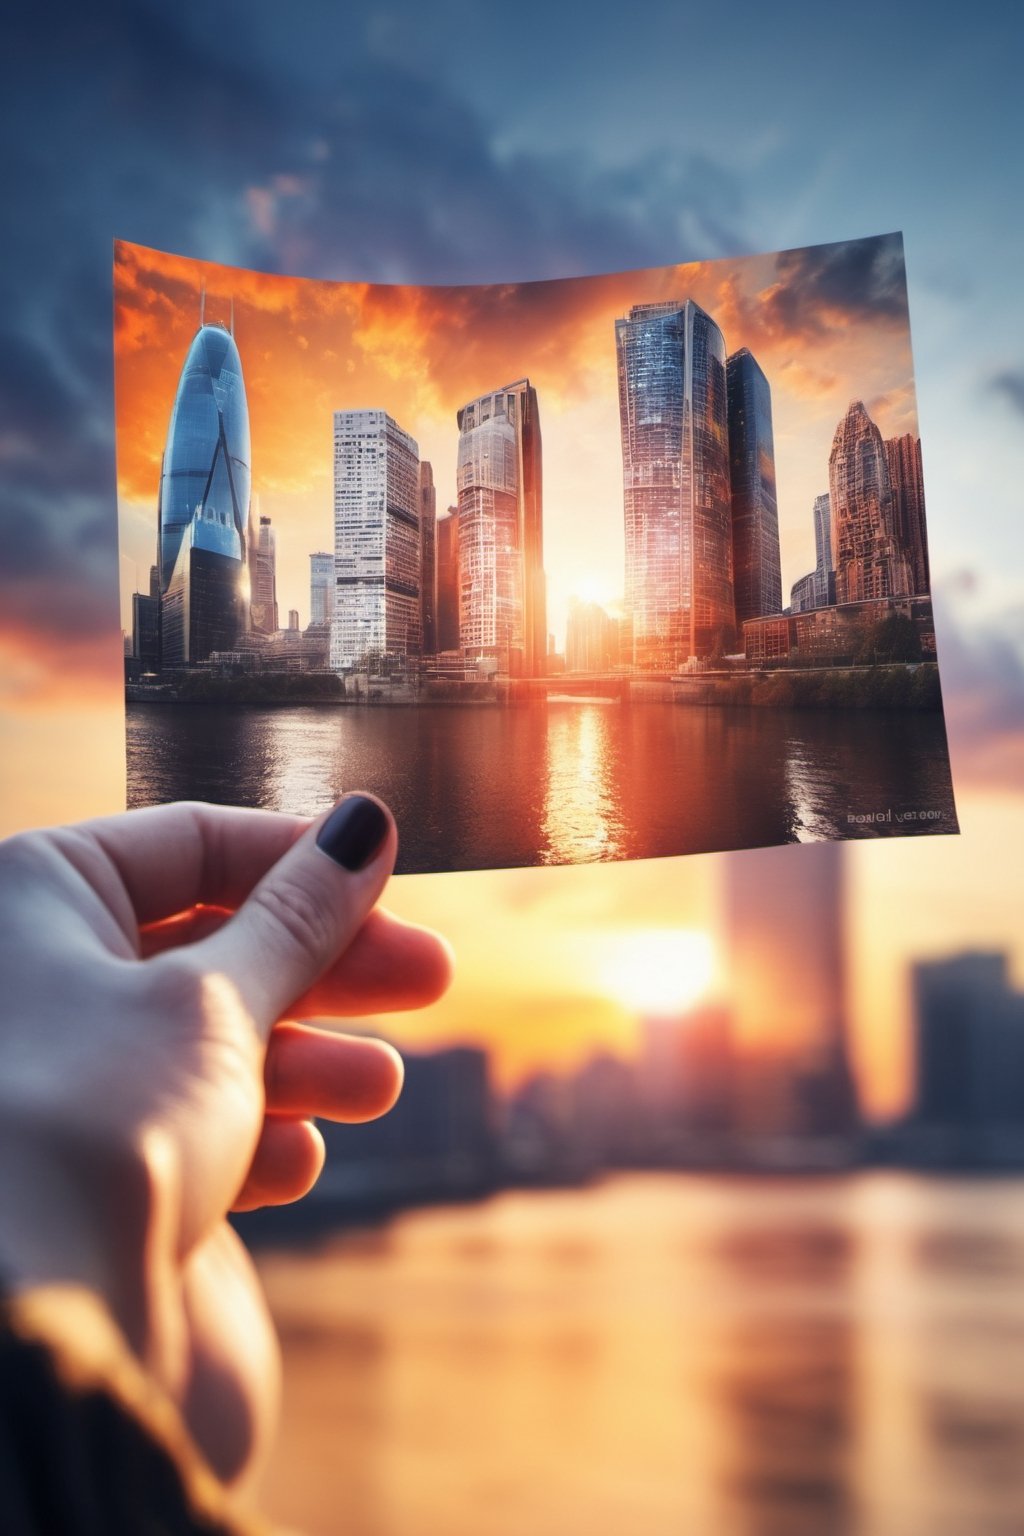 (women's hand, Holding a photo, the photo shows urban scenery, cityscape, city, scenery, building, sky, skyscraper, outdoors, sunset, watermark, science fiction, real world location, Megacity), Detailed Textures, high quality, high resolution, high Accuracy, realism, color correction, Proper lighting settings, harmonious composition, Behance works,photo r3al